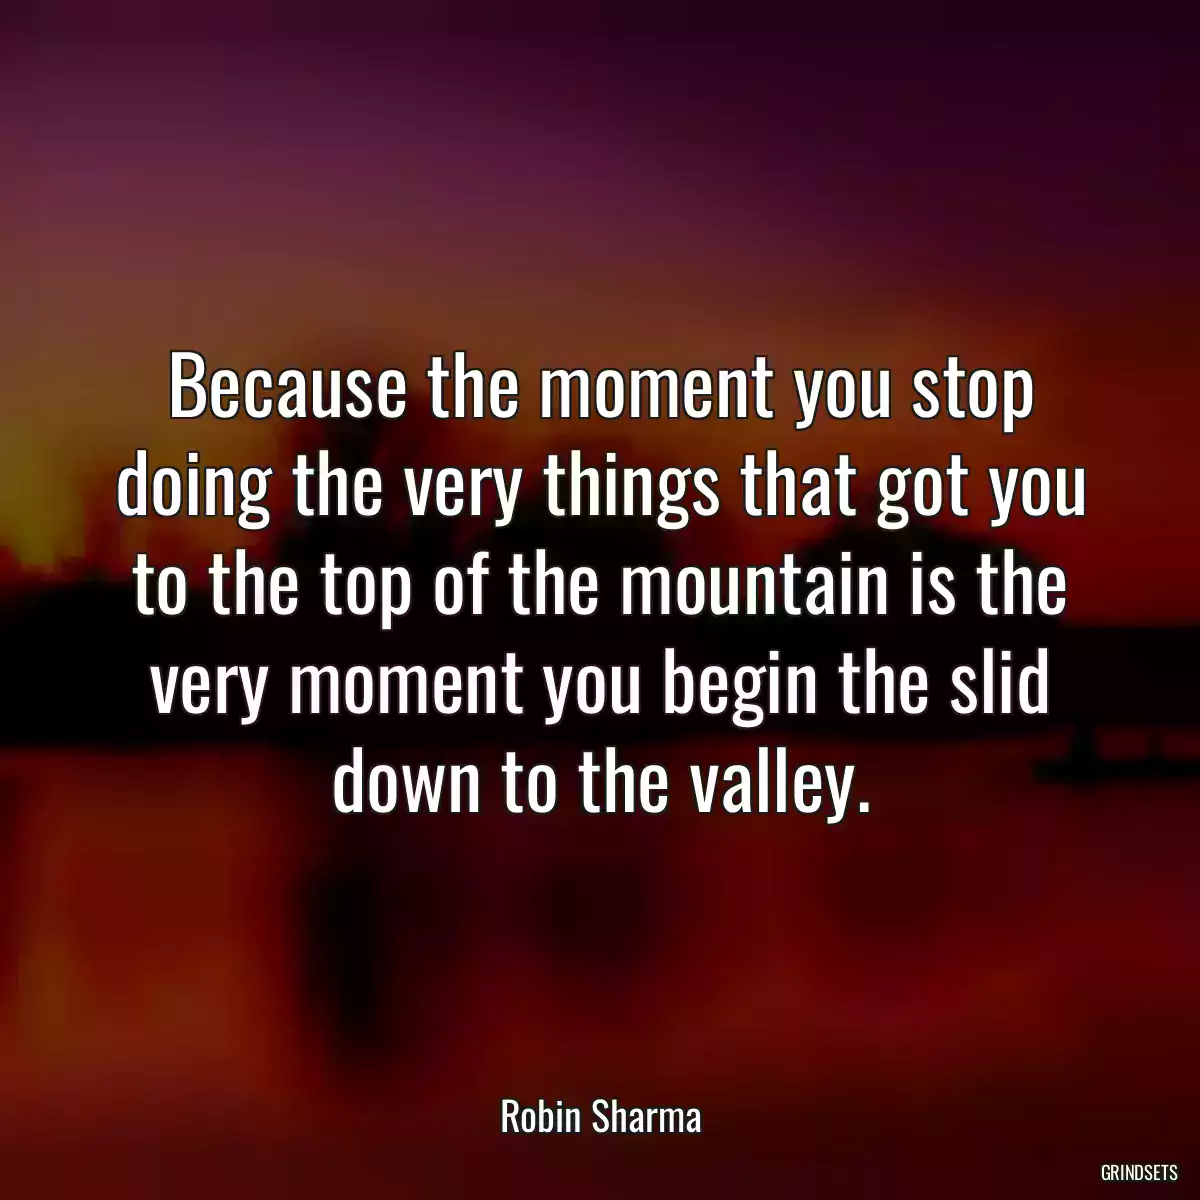 Because the moment you stop doing the very things that got you to the top of the mountain is the very moment you begin the slid down to the valley.